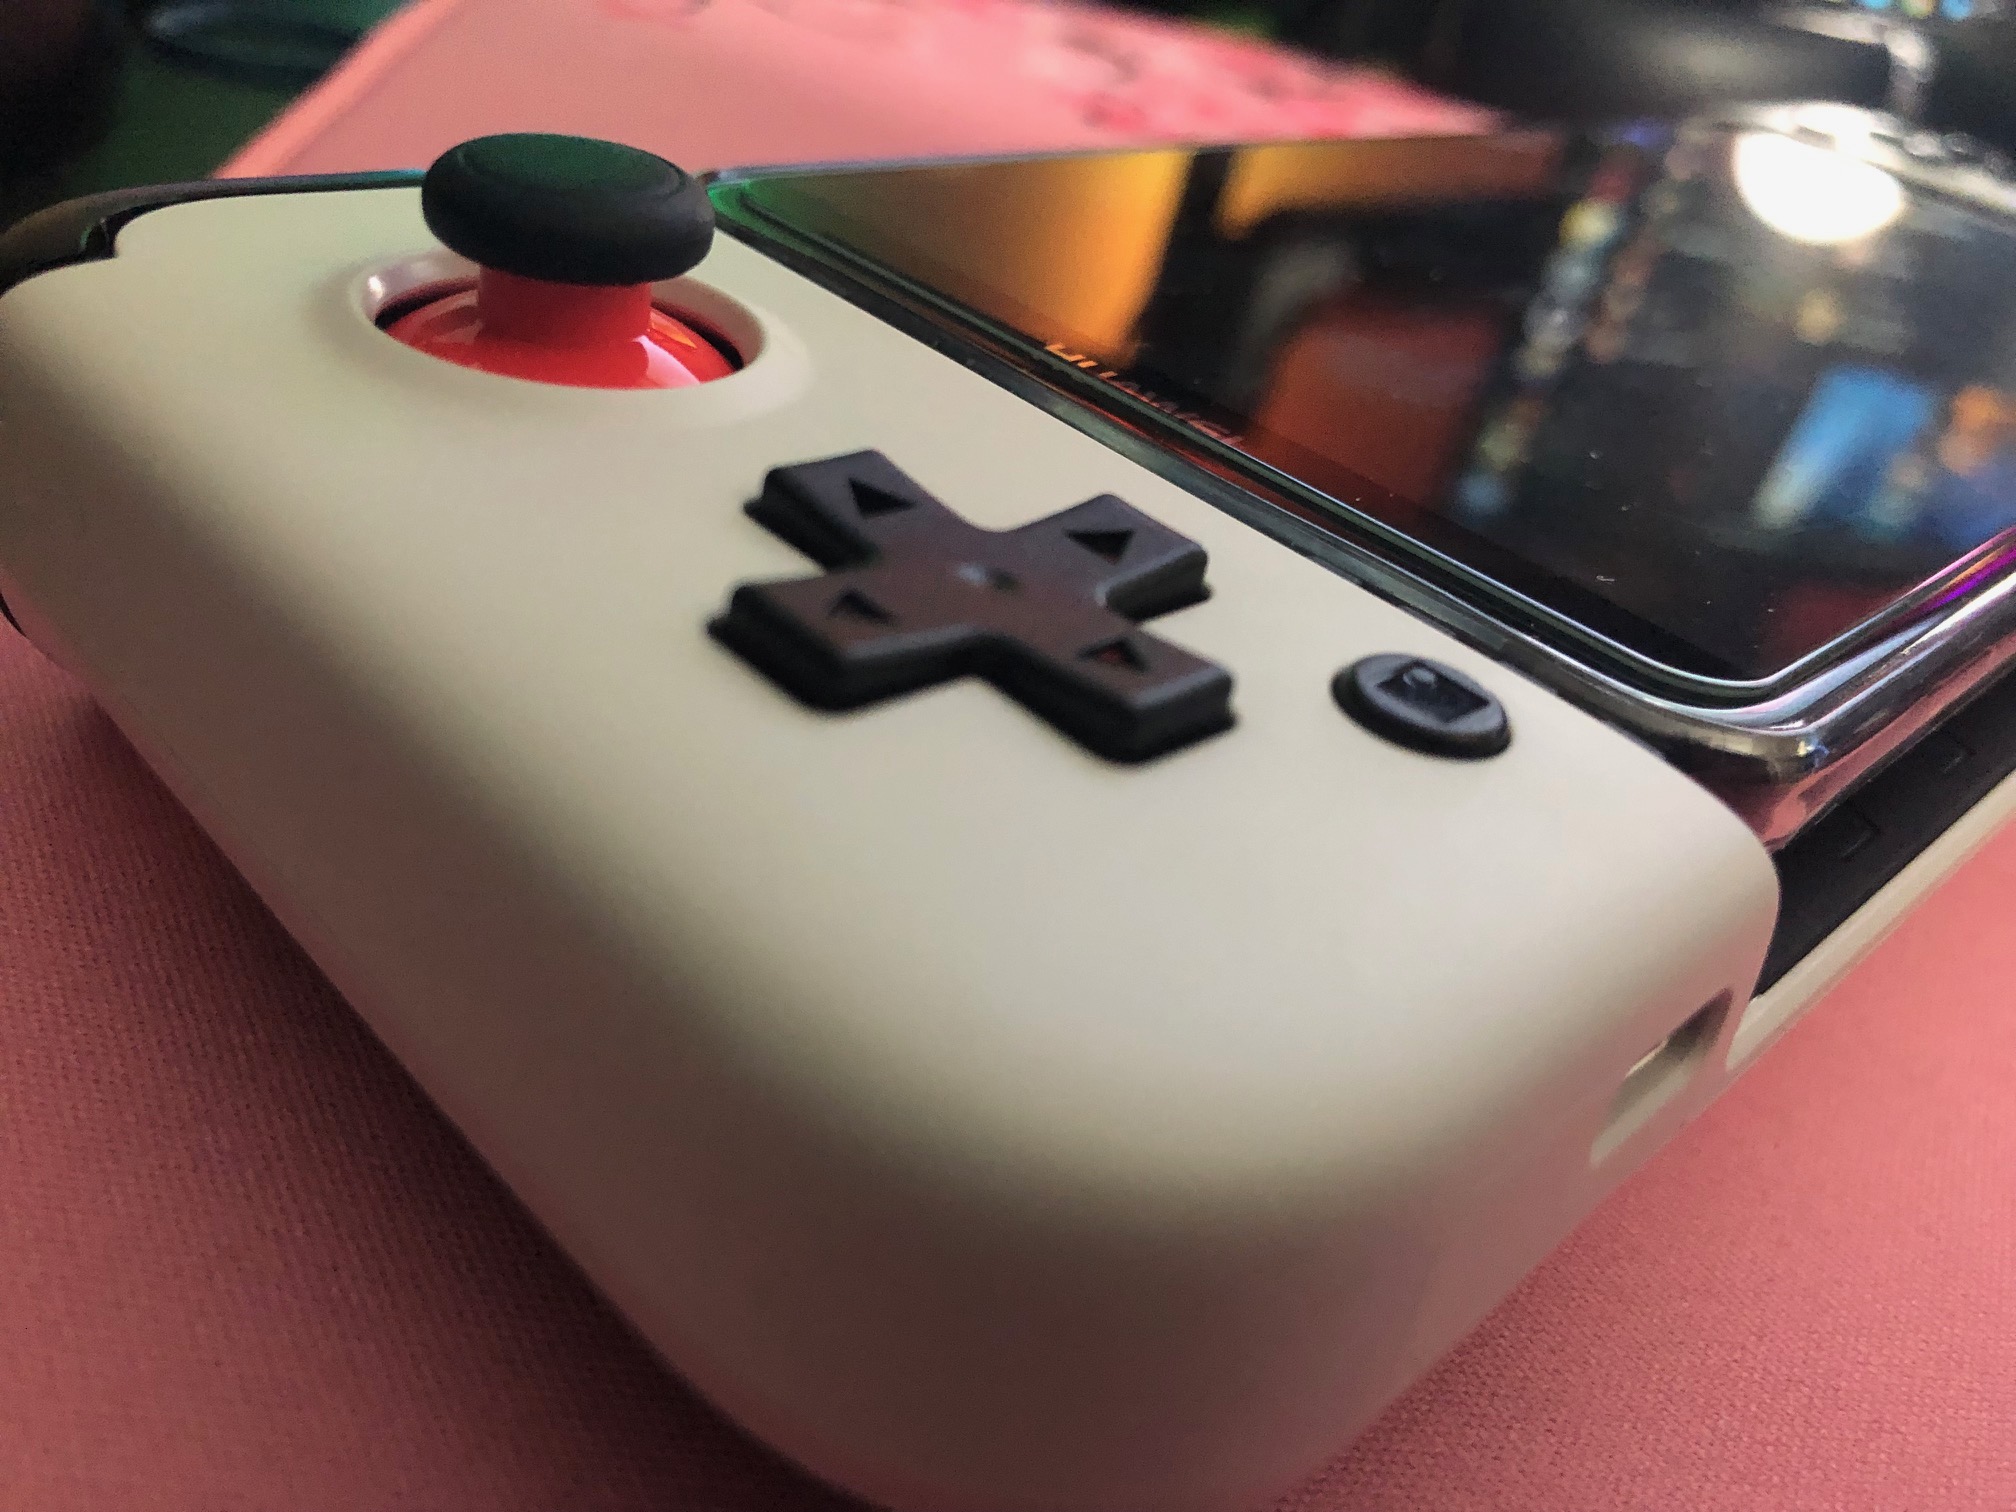 How do I use classic controller support? : r/EmulationOnAndroid